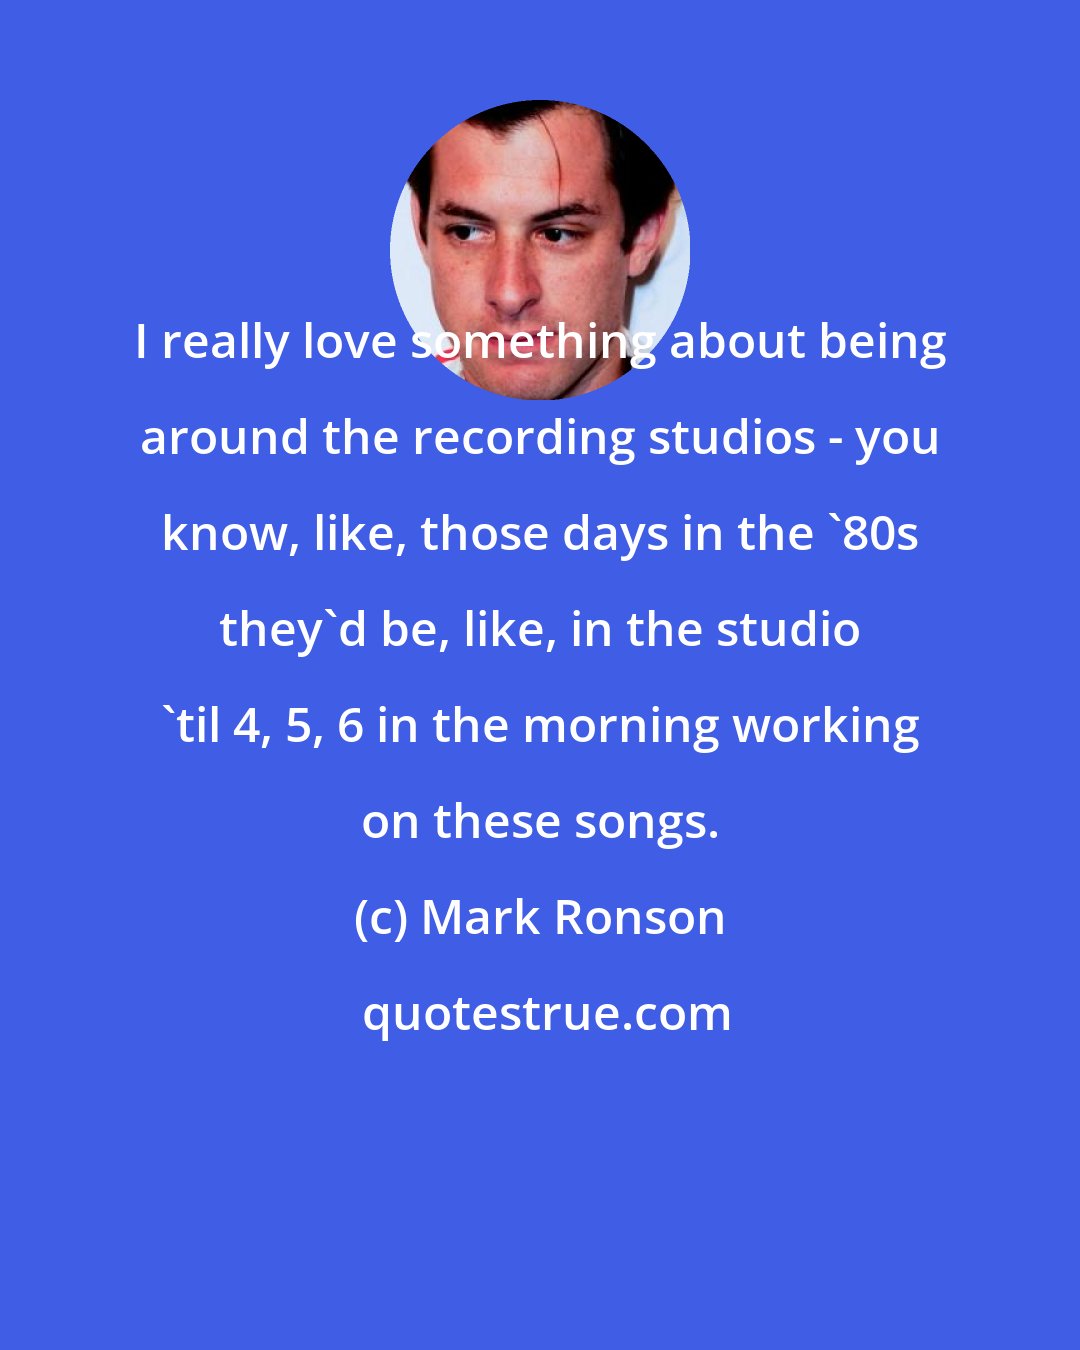 Mark Ronson: I really love something about being around the recording studios - you know, like, those days in the '80s they'd be, like, in the studio 'til 4, 5, 6 in the morning working on these songs.